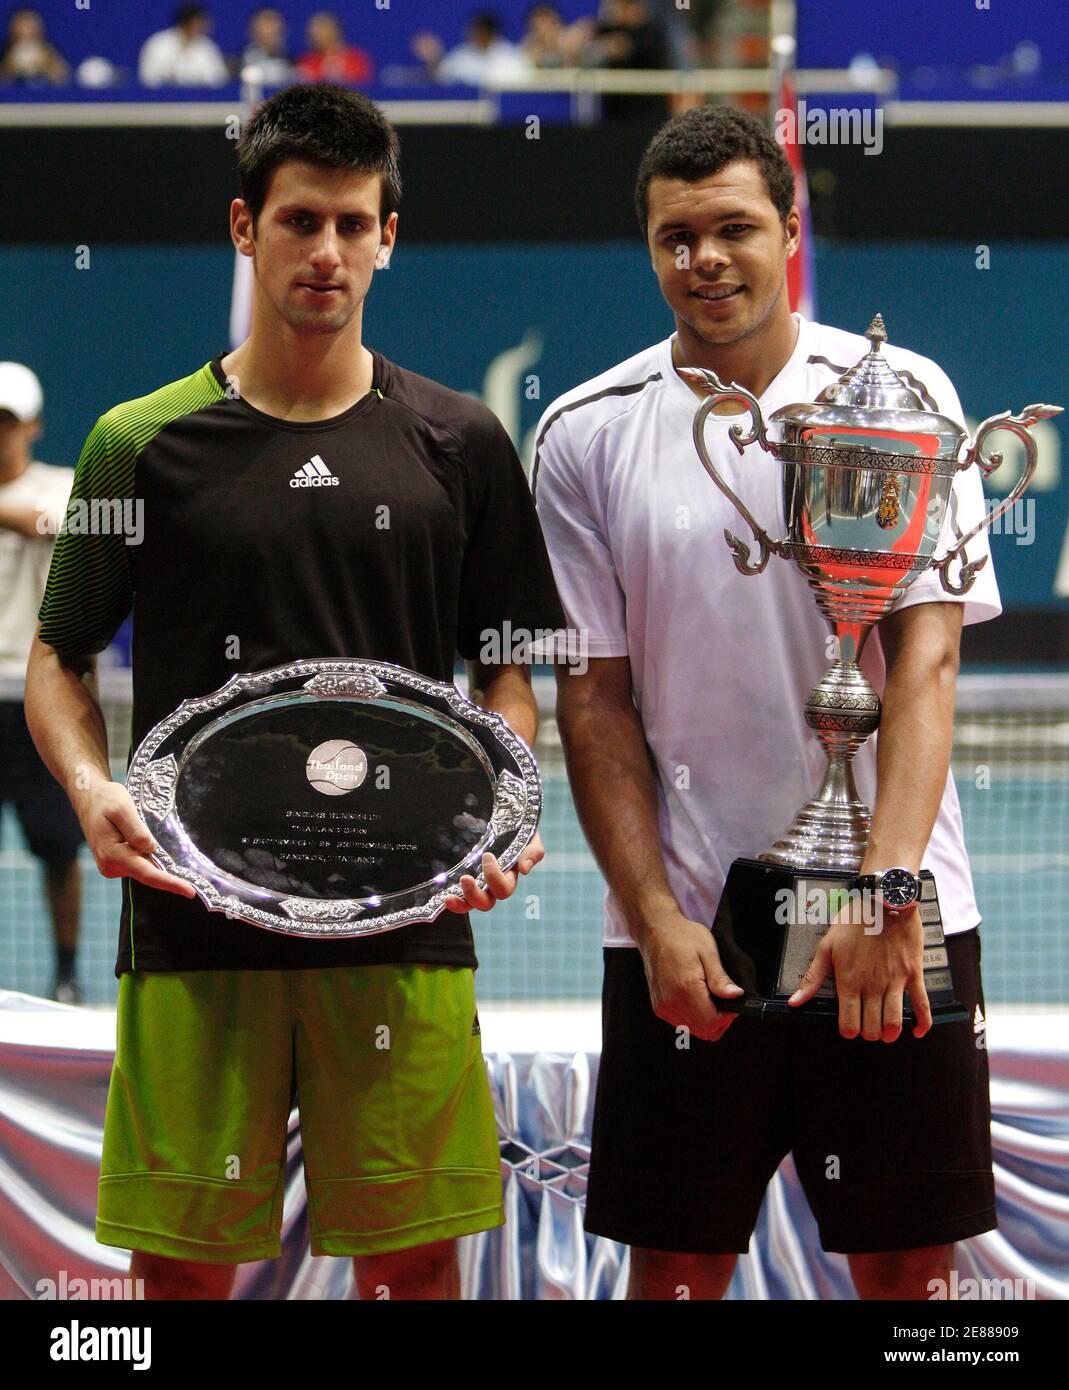 Jo-Wilfried Tsonga of France (R) and Novak Djokovic of Serbia pose after  their final tennis match at the Thailand Open 2008 in Bangkok September 28,  2008. Tsonga won the match. REUTERS/Chaiwat Subprasom (